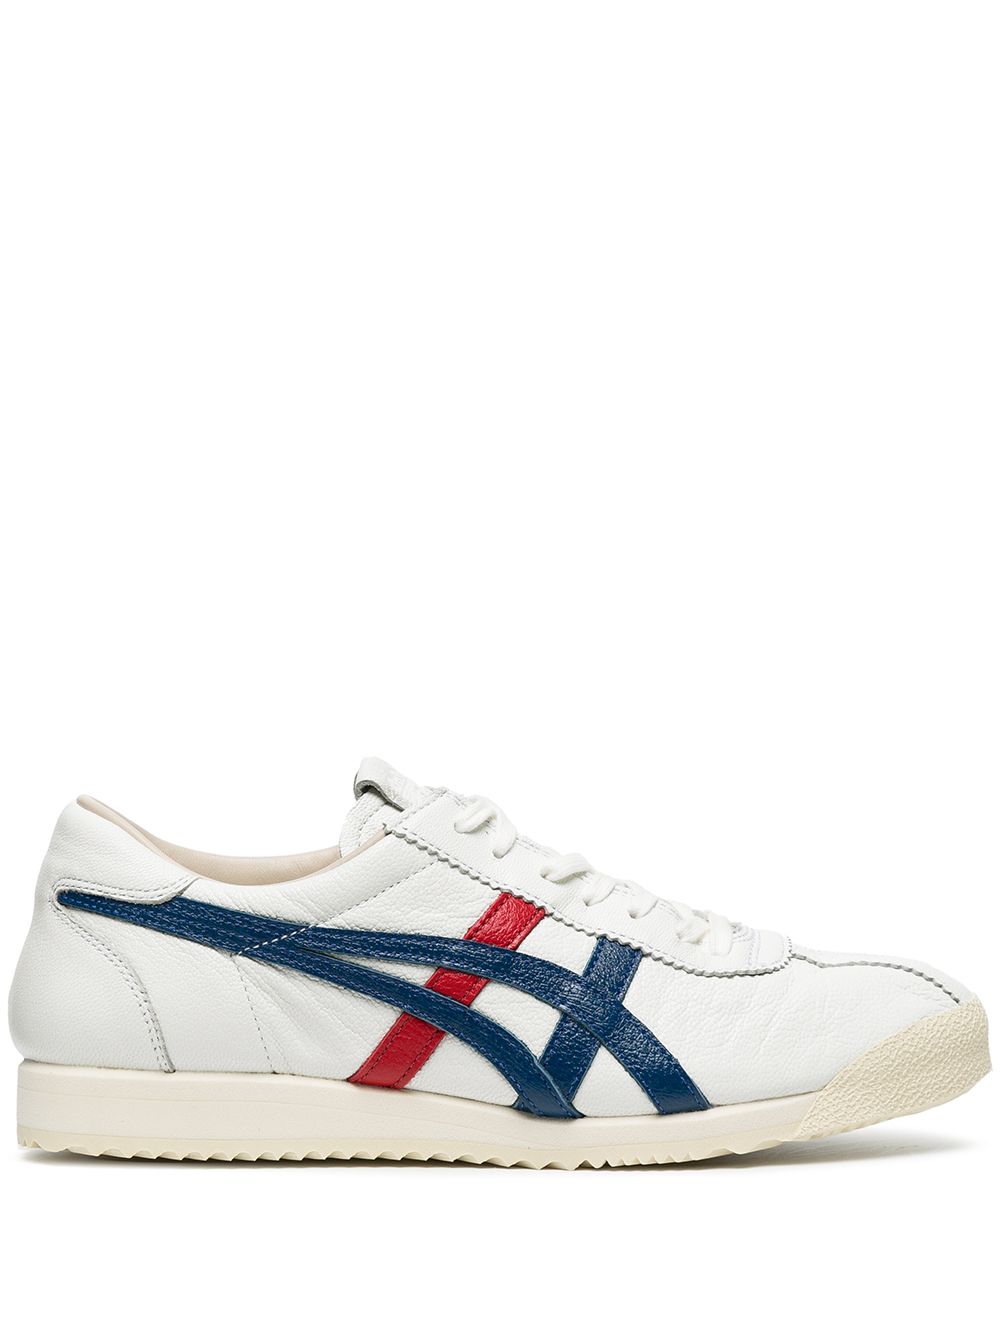 Image 1 of Onitsuka Tiger Tiger Corsair Deluxe low-top sneakers